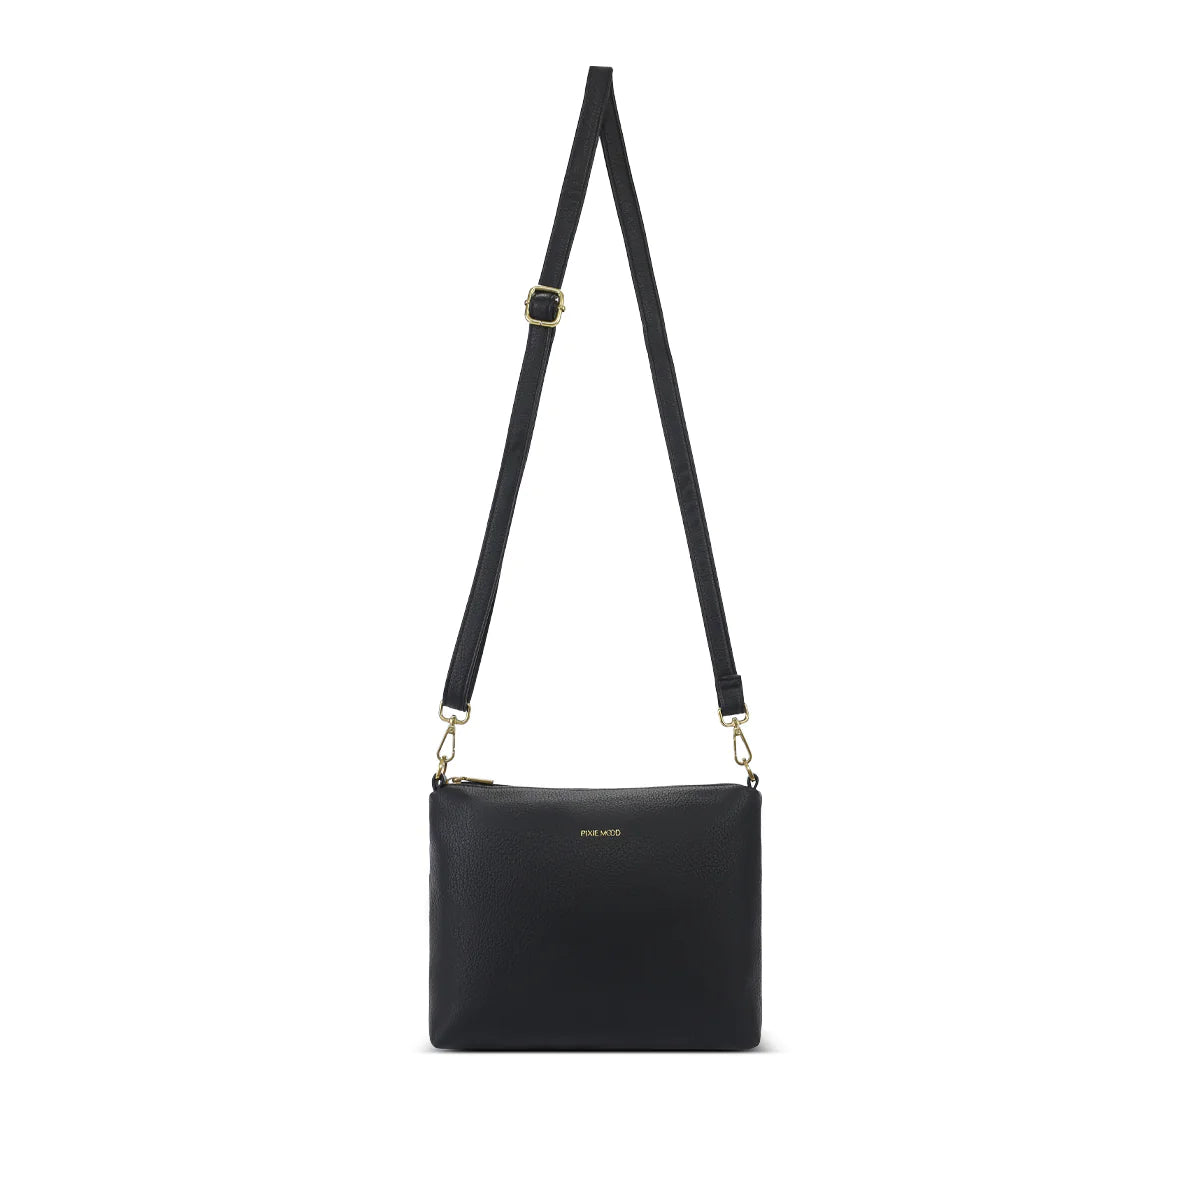 Alicia Tote II by Pixie Mood